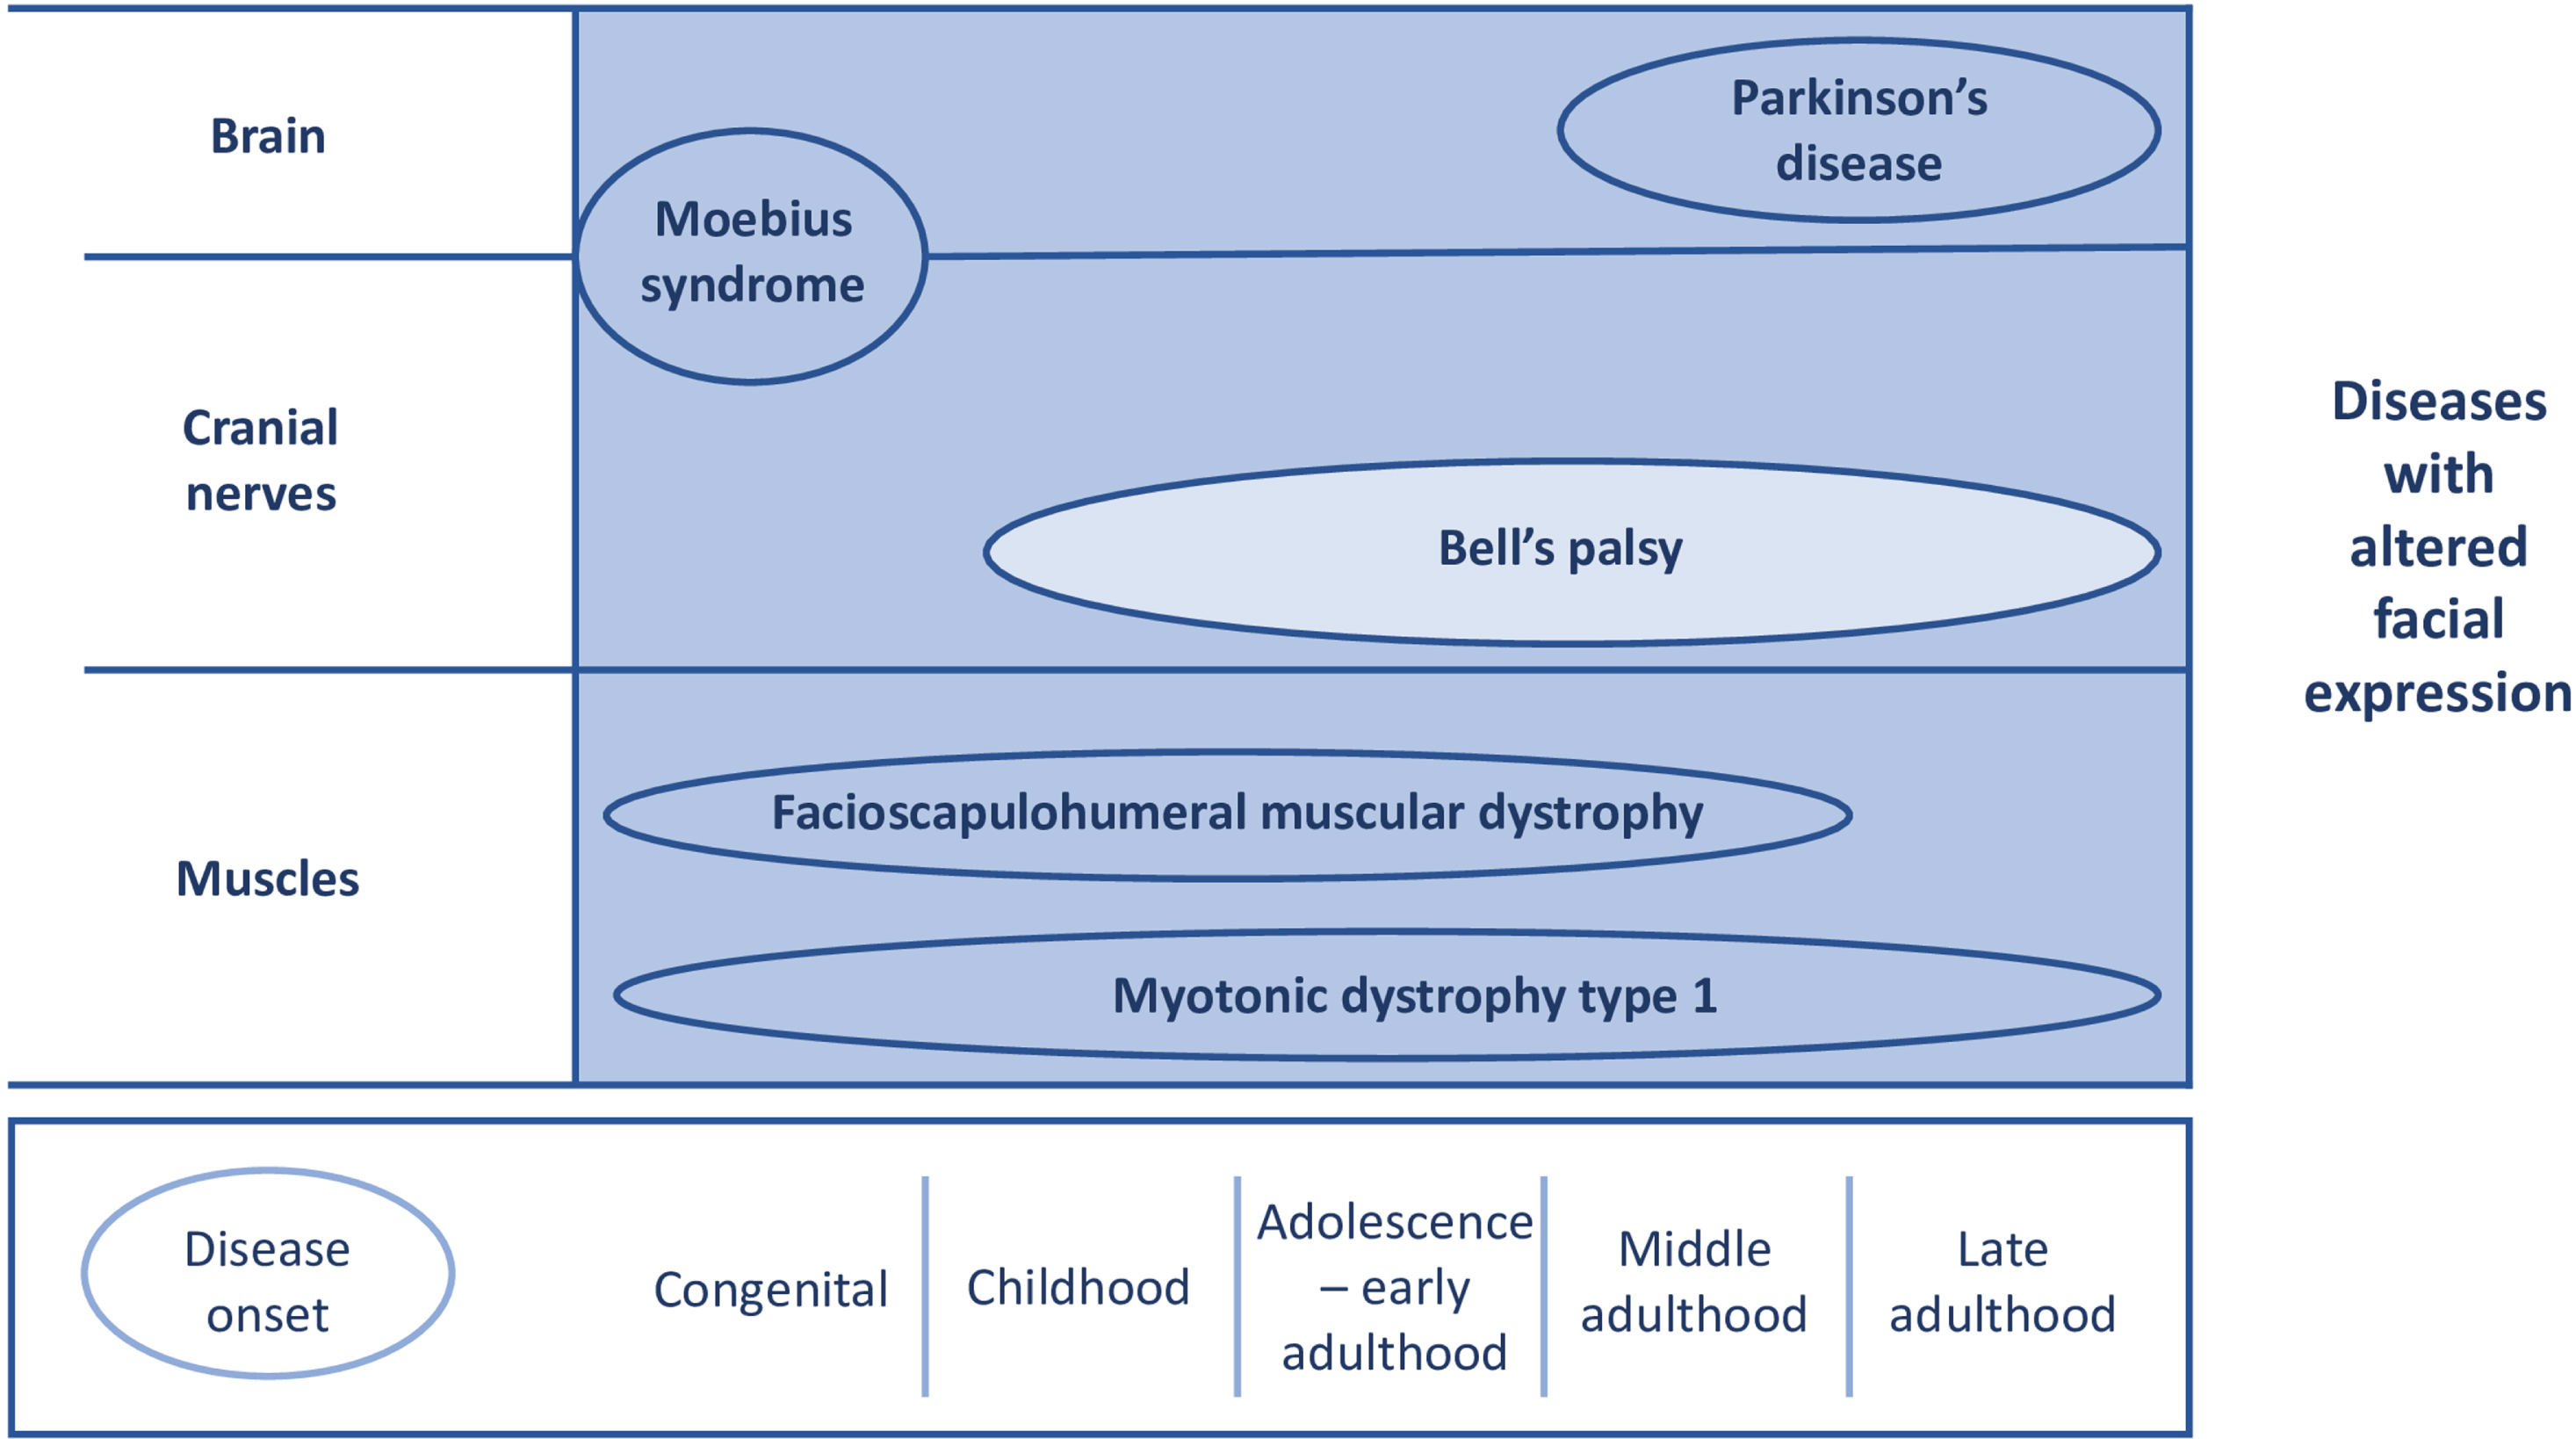 Overview for time of onset and origin of pathophysiology in the included diseases. X-axis: time of onset. Y-axis: anatomical localisation of pathophysiology.Disease progression: dark colour represents a gradual onset; light colour represents an acute onset.Bell’s palsy is an acute-onset unilateral lower motor neuron palsy, with idiopathic origin. Other symptoms that frequently occur are facial pain, altered facial sensations, dysgeusia, and hyperacusis [94].Facioscapulohumeral muscular dystrophy is a slowly progressive, inherited neuromuscular disorder. It is caused by a repeat contraction of D4Z4 macrosatellite array on chromosome 4. Facial weakness is one of the first disease symptoms. Other symptoms include muscle weakness of the lower limbs and trunk [2].Moebius syndrome is a congenital disease facial nerve palsy (uni- or bilateral) and abducens nerve palsy, which is caused by cranial nerve nuclei impairments [26]. It is a rare disease (estimated prevalence: 1/50,000) [95]. Studies suggest a higher risk of developing an autism spectrum disorder and cognitive impairment in patients with Moebius syndrome, although level of evidence is low [96].Myotonic dystrophy type 1 is a multisystem disorder, caused by an CTG triplet expansion in the DMPK gene. Cardinal symptoms are myotonia and muscle weakness in facial, trunk and distal limb muscles. Facial weakness leads to a specific facial appearance with tented upper lip. Other symptoms include cardiac conduction defects, respiratory insufficiency, and cataract [97].Parkinson’s disease is a progressive neurodegenerative disease, which is caused by dopamine depletion, due to loss of dopaminergic neurons in the substantia nigra. One of the symptoms is hypomimia (caused by bradykinesia). Other cardinal symptoms include postural instability, rigidity, and resting tremor [98].Adapted from ‘’Psychosocial functioning in patients with altered facial expression: a scoping review in five neurological diseases” by N.B. Rasing et al. 2023 [25].